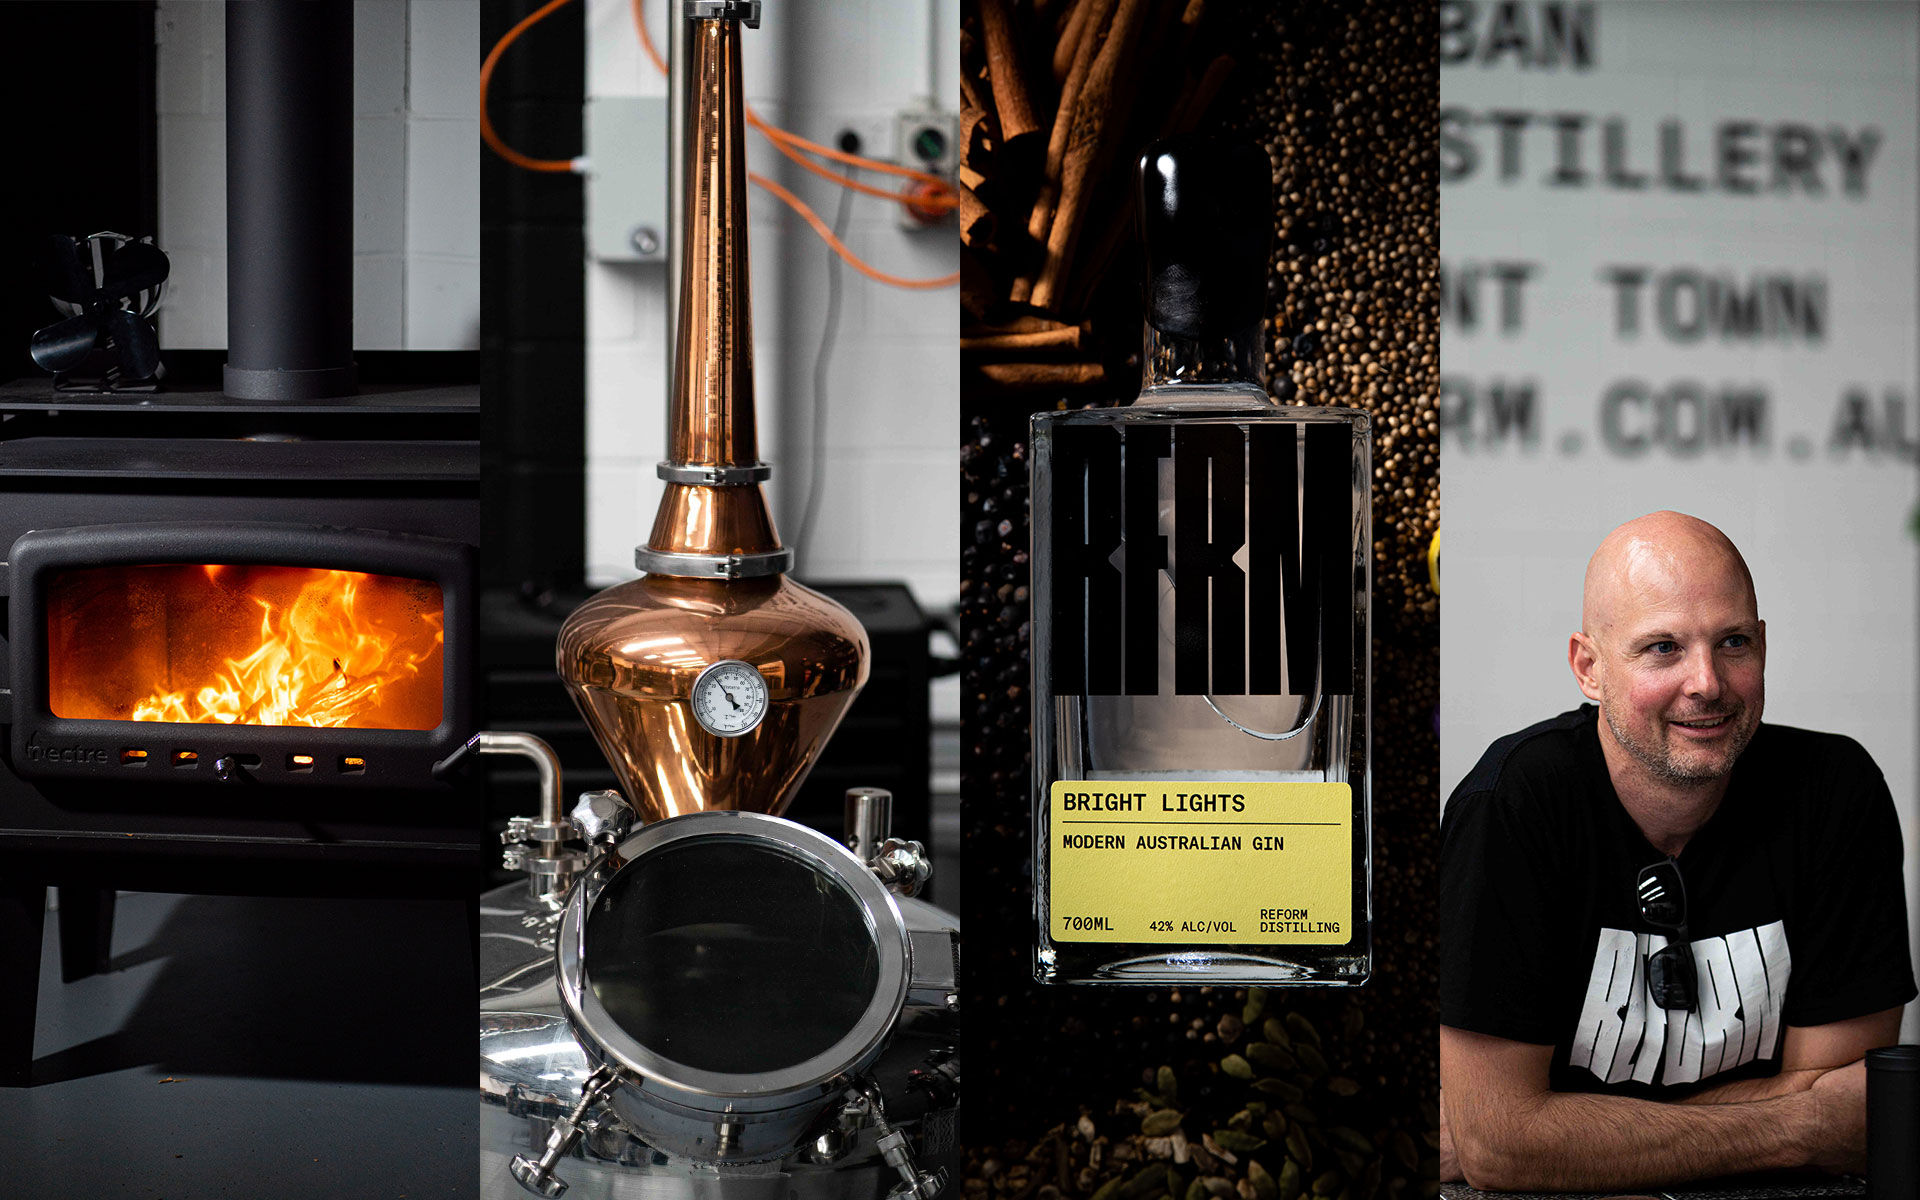 Reform Distilling - Fire Place, Still, Bright Lights Gin and Owner